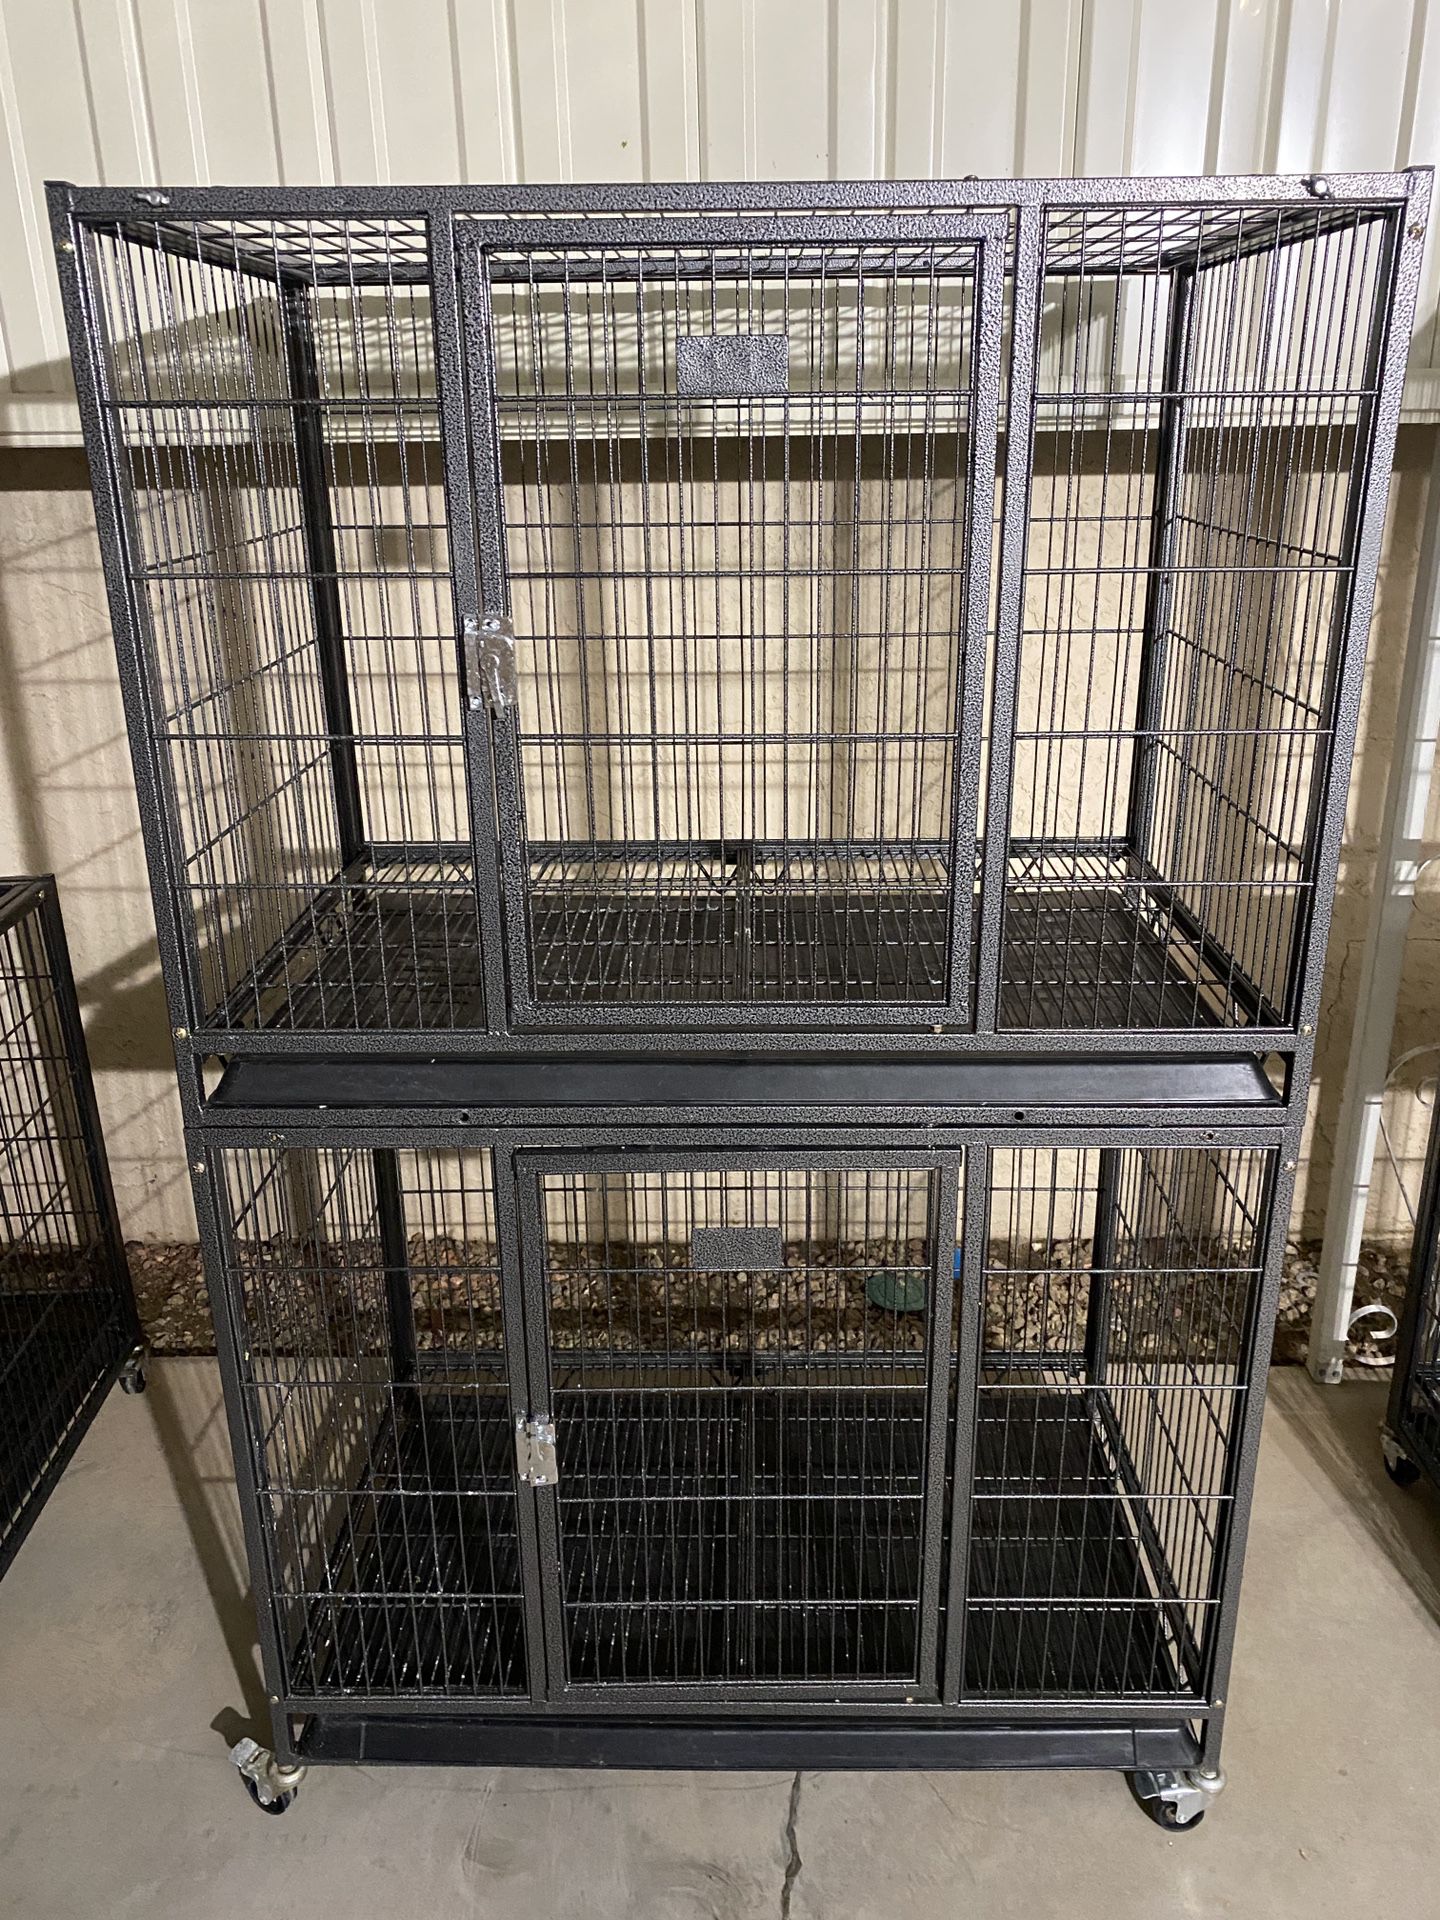 Tower Bird cage Or dog Kennel